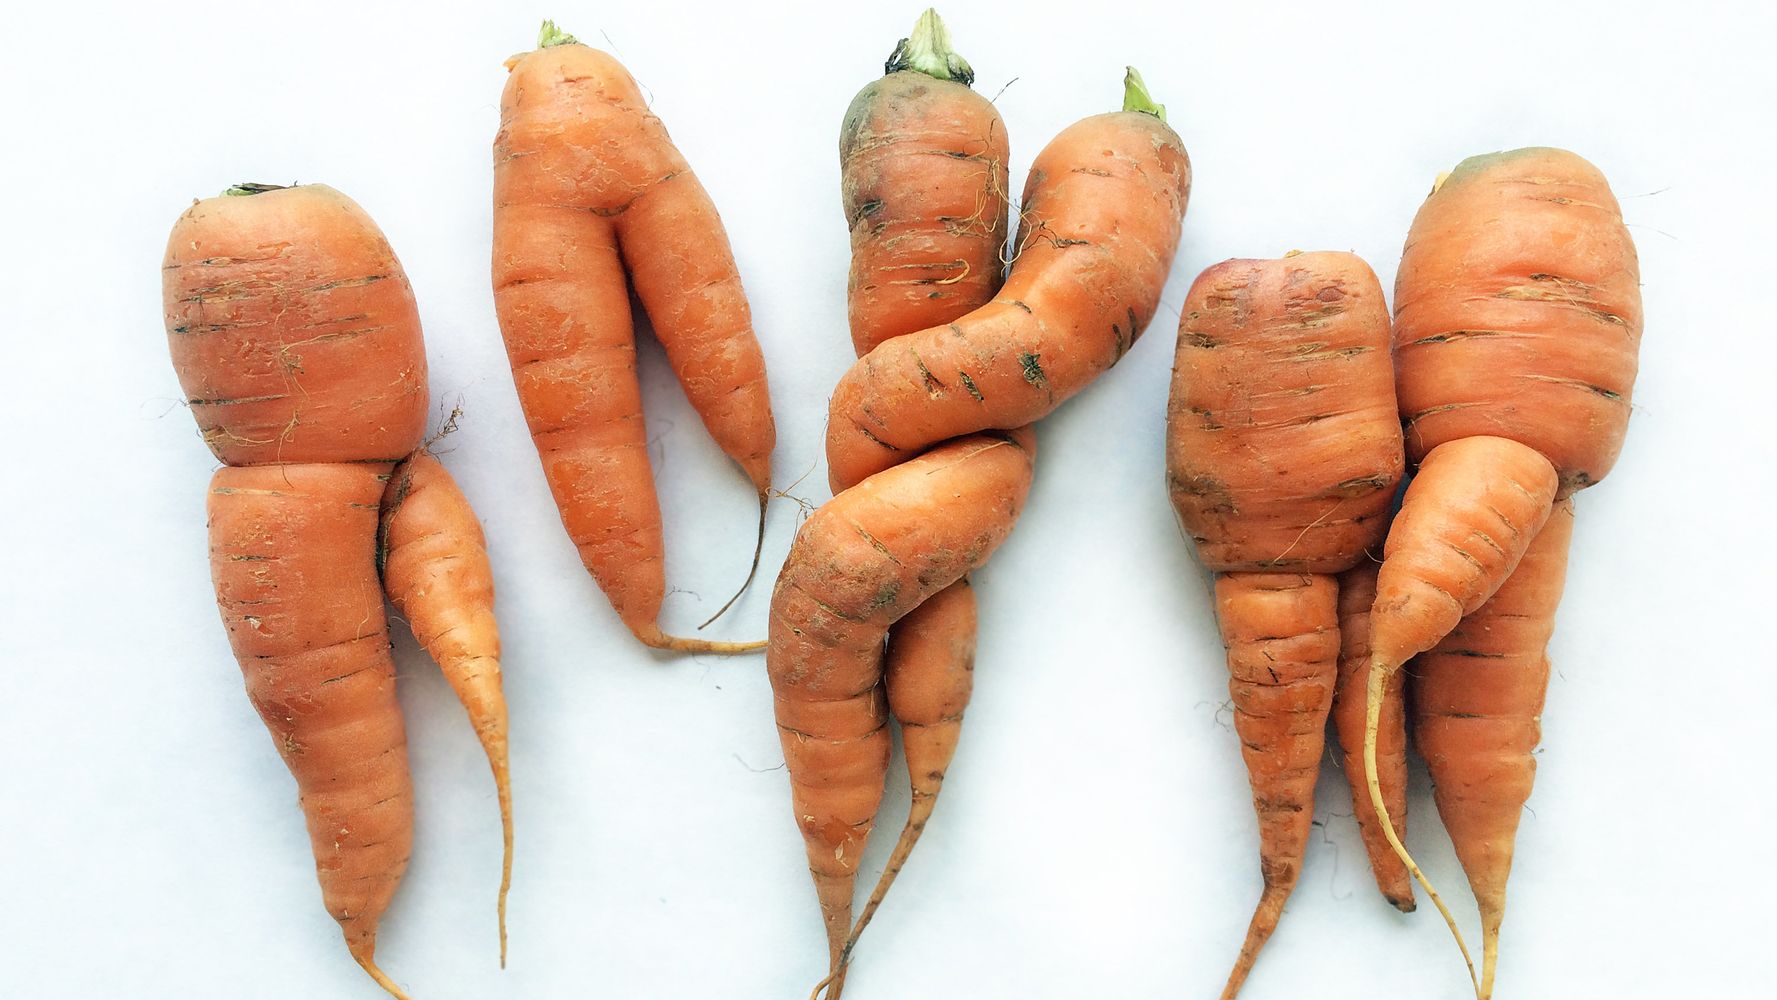 Interest in 'ugly produce' trending downward with grocers, shoppers